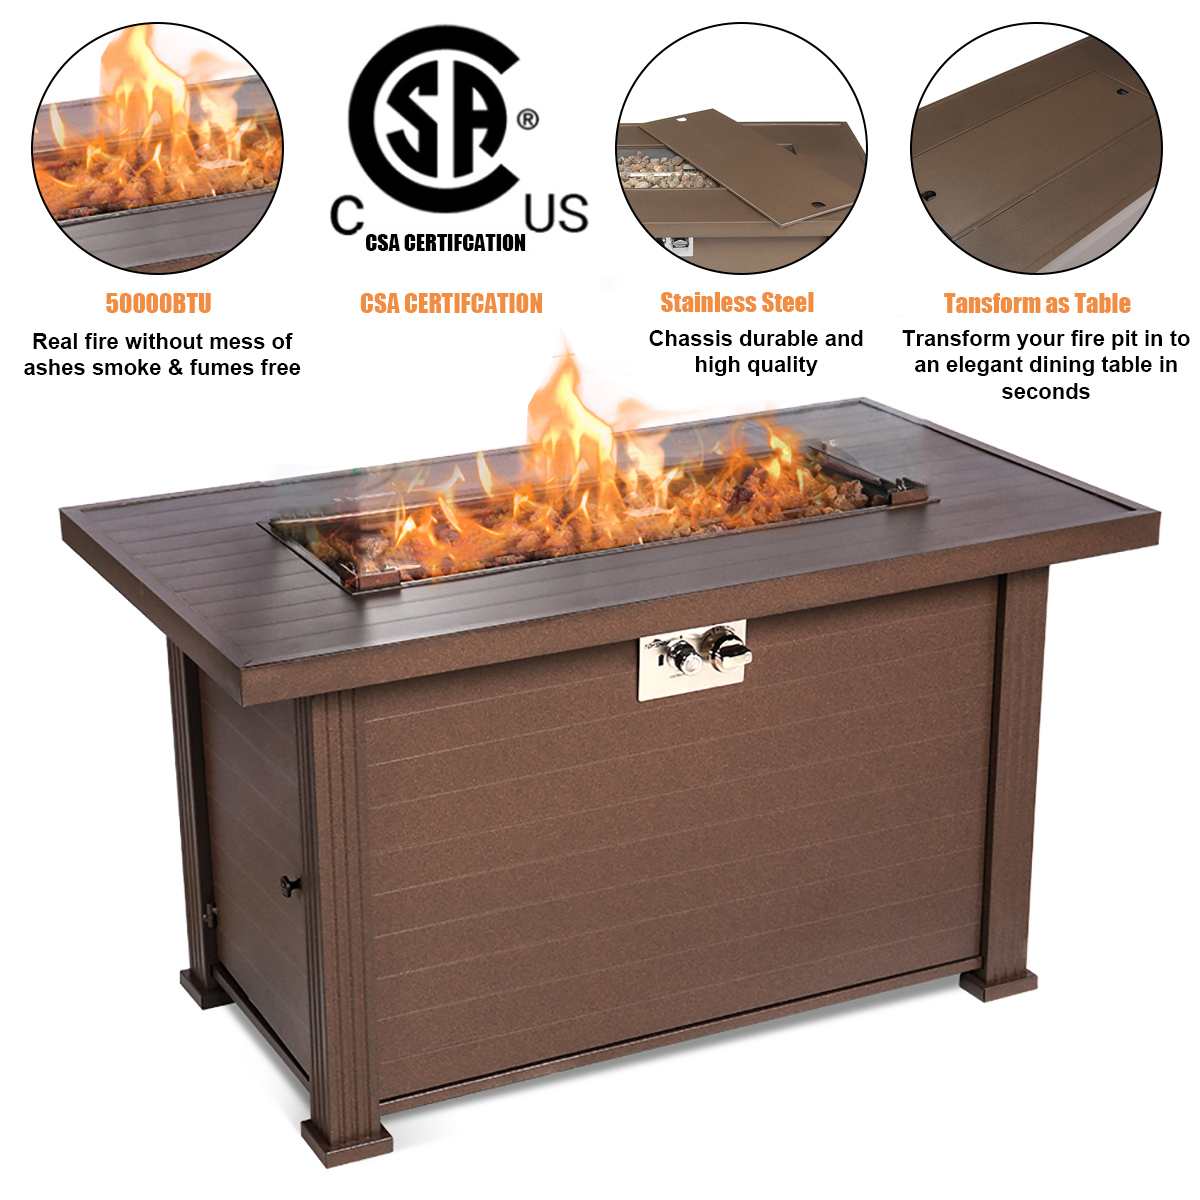 Topshak-GF2 44 Inch Grand Patio Outdoor Gas Fire Pit Table 50000 BTU Rectangle Patio Propane Fire Pit Table Camping Stand Stove - youronestopstore23